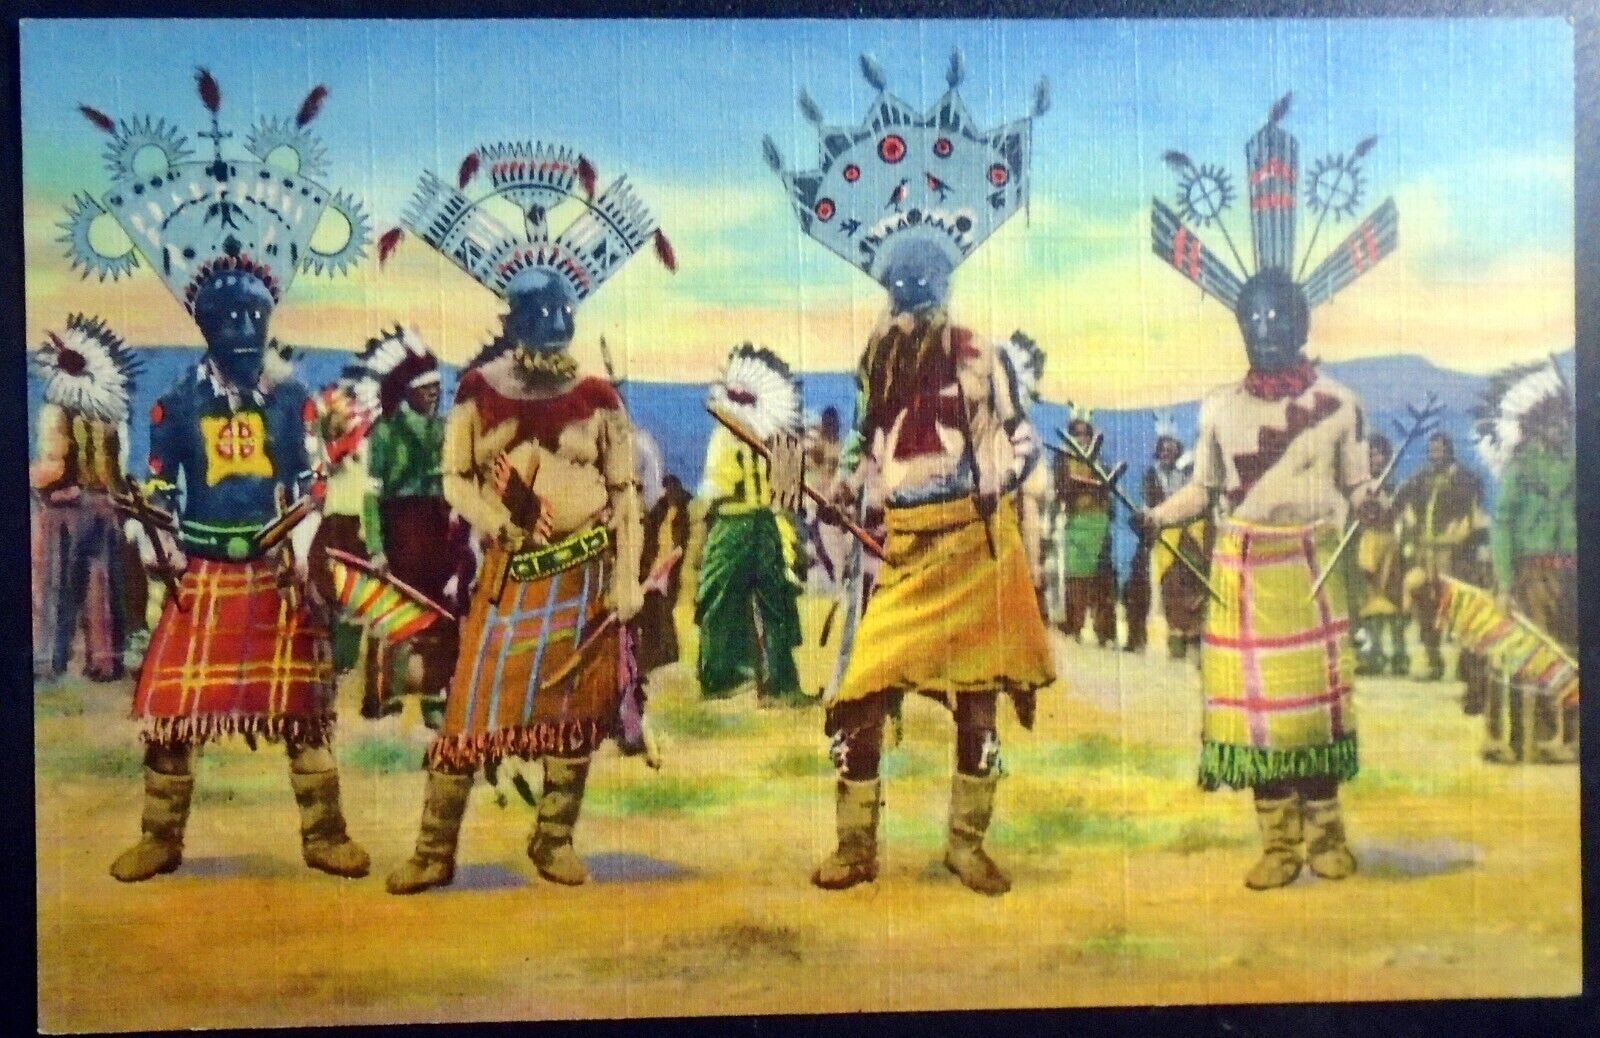 1937 Devil Dance of the Apache Indians, Inter-Tribal Ceremonial, Gallup, NM